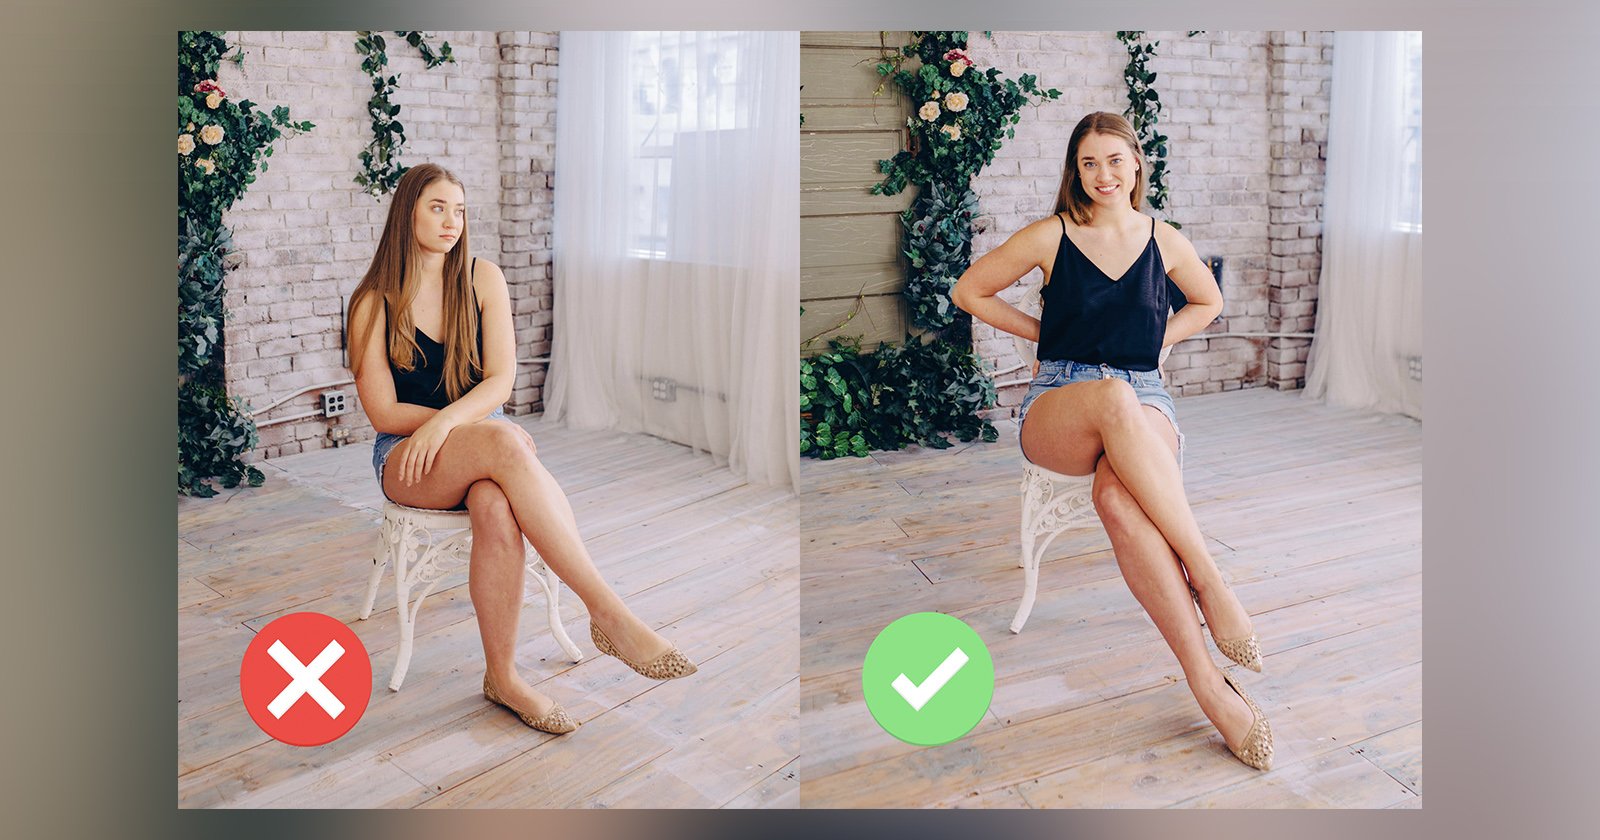 Female Photoshoot POSES: 10 TIPS and Photo Examples ◾️ iPhotography